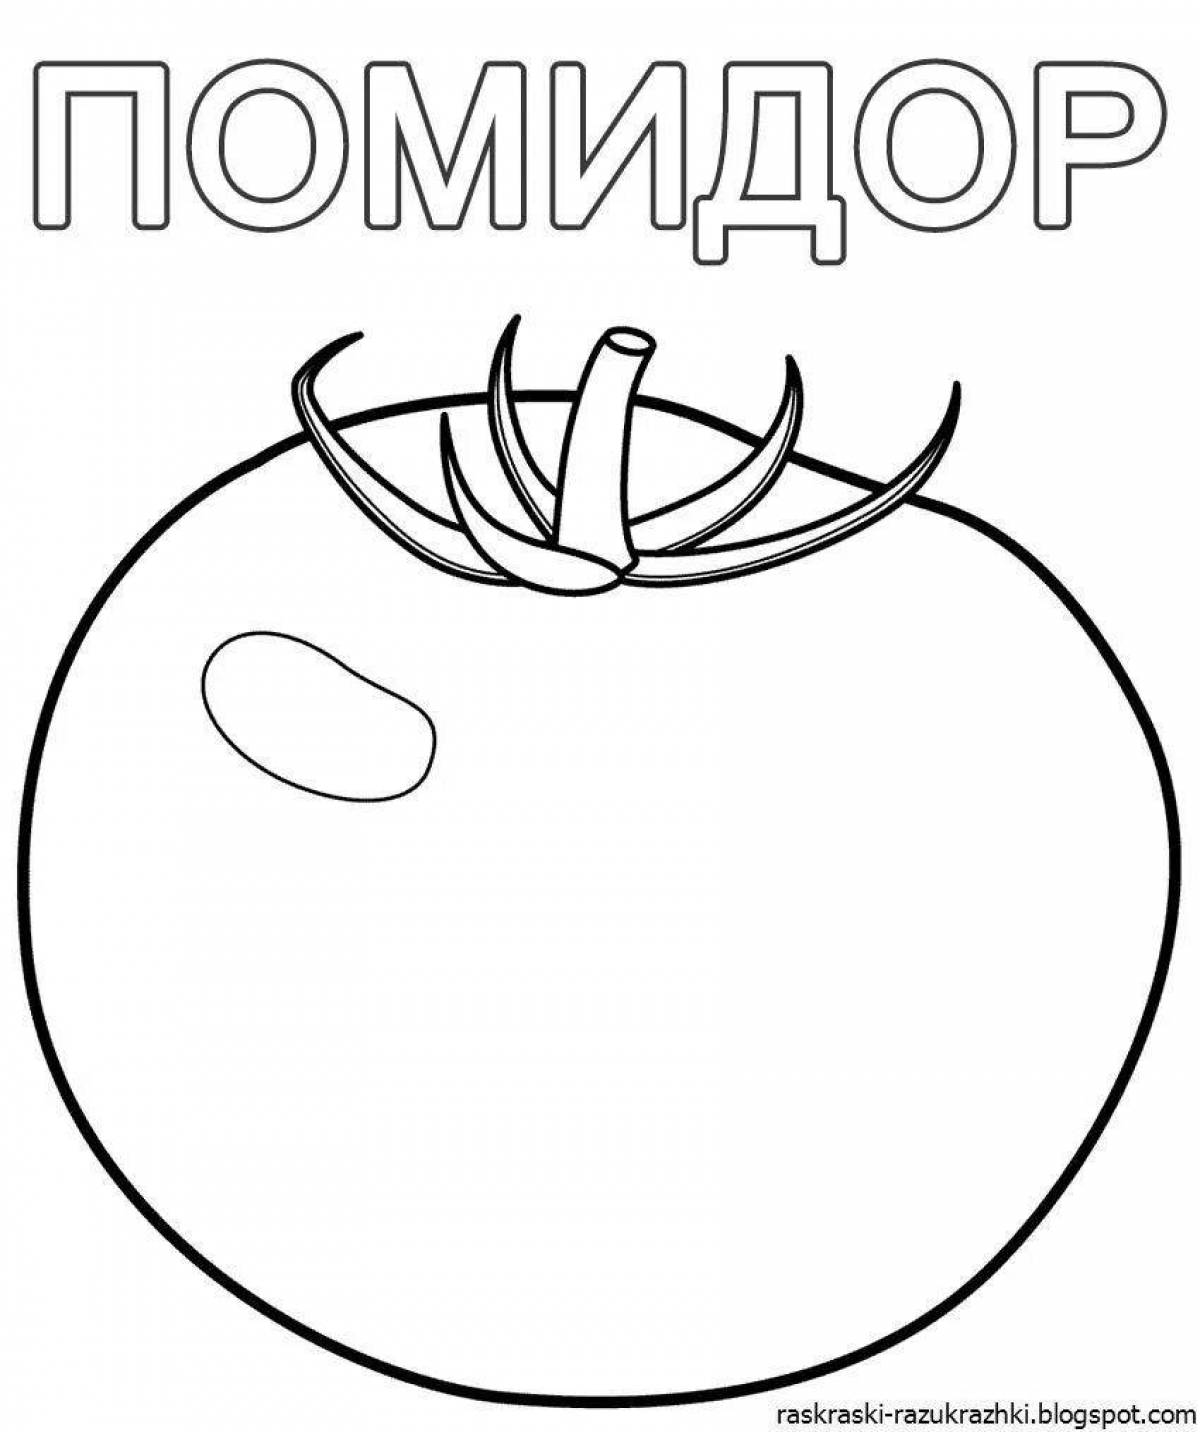 Funny tomato coloring book for 2-3 year olds